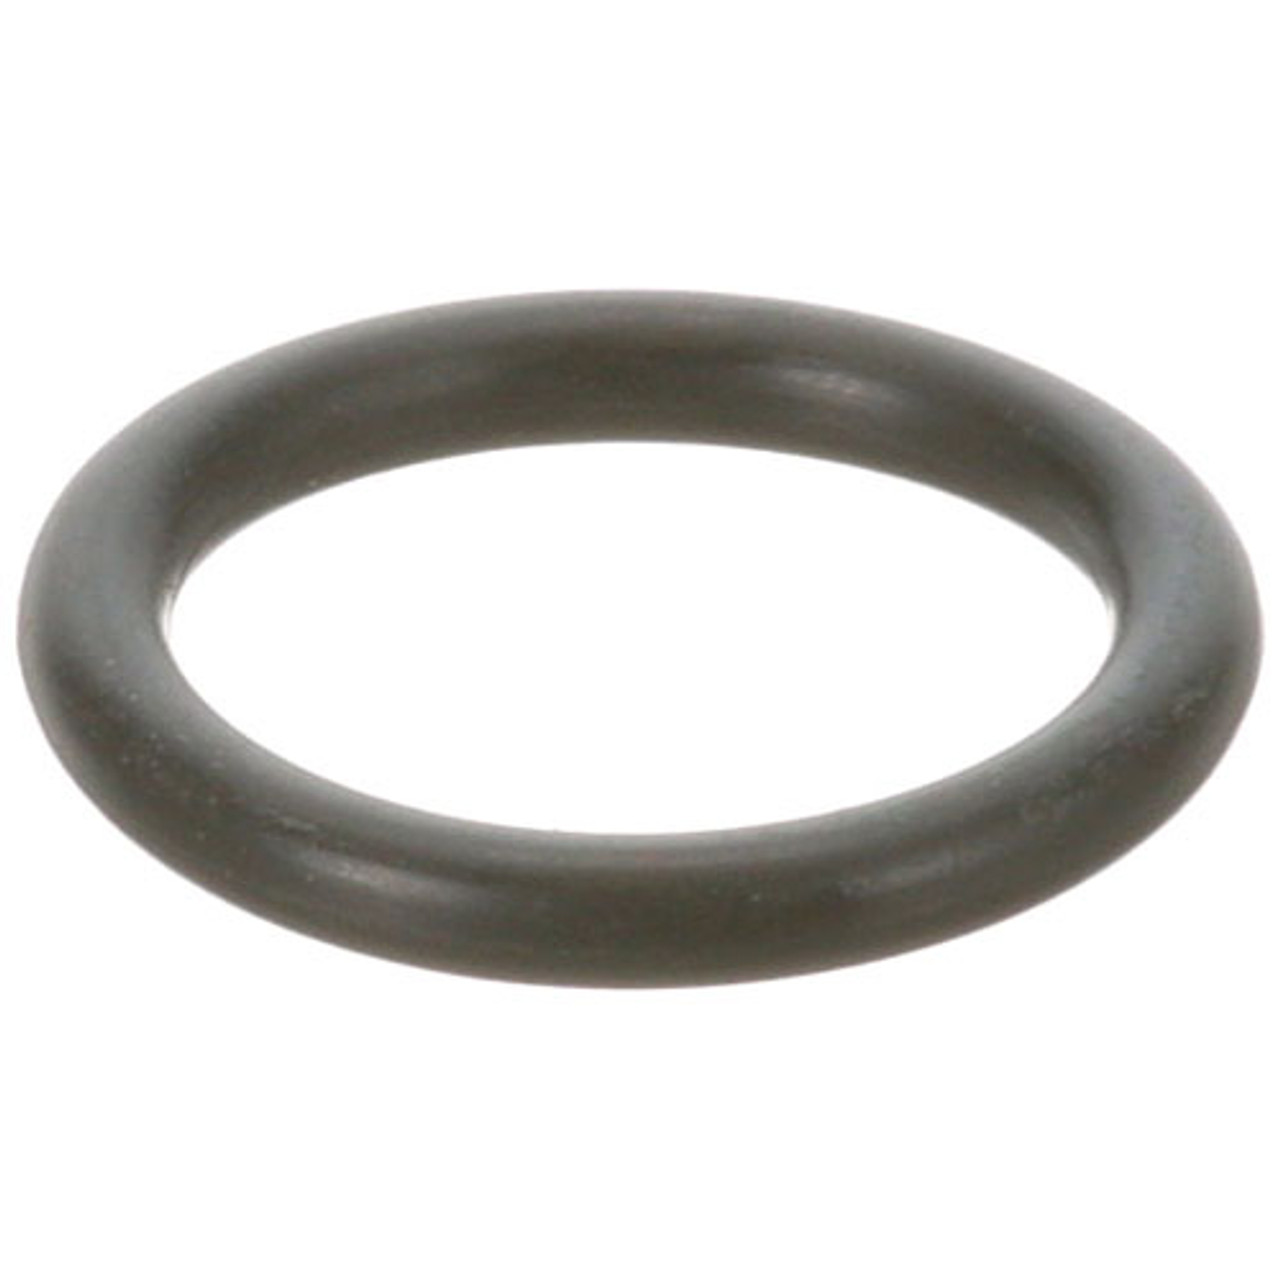 O-Ring 13/16" Id X 1/8" Width - Replacement Part For Hobart 00-67500-00075